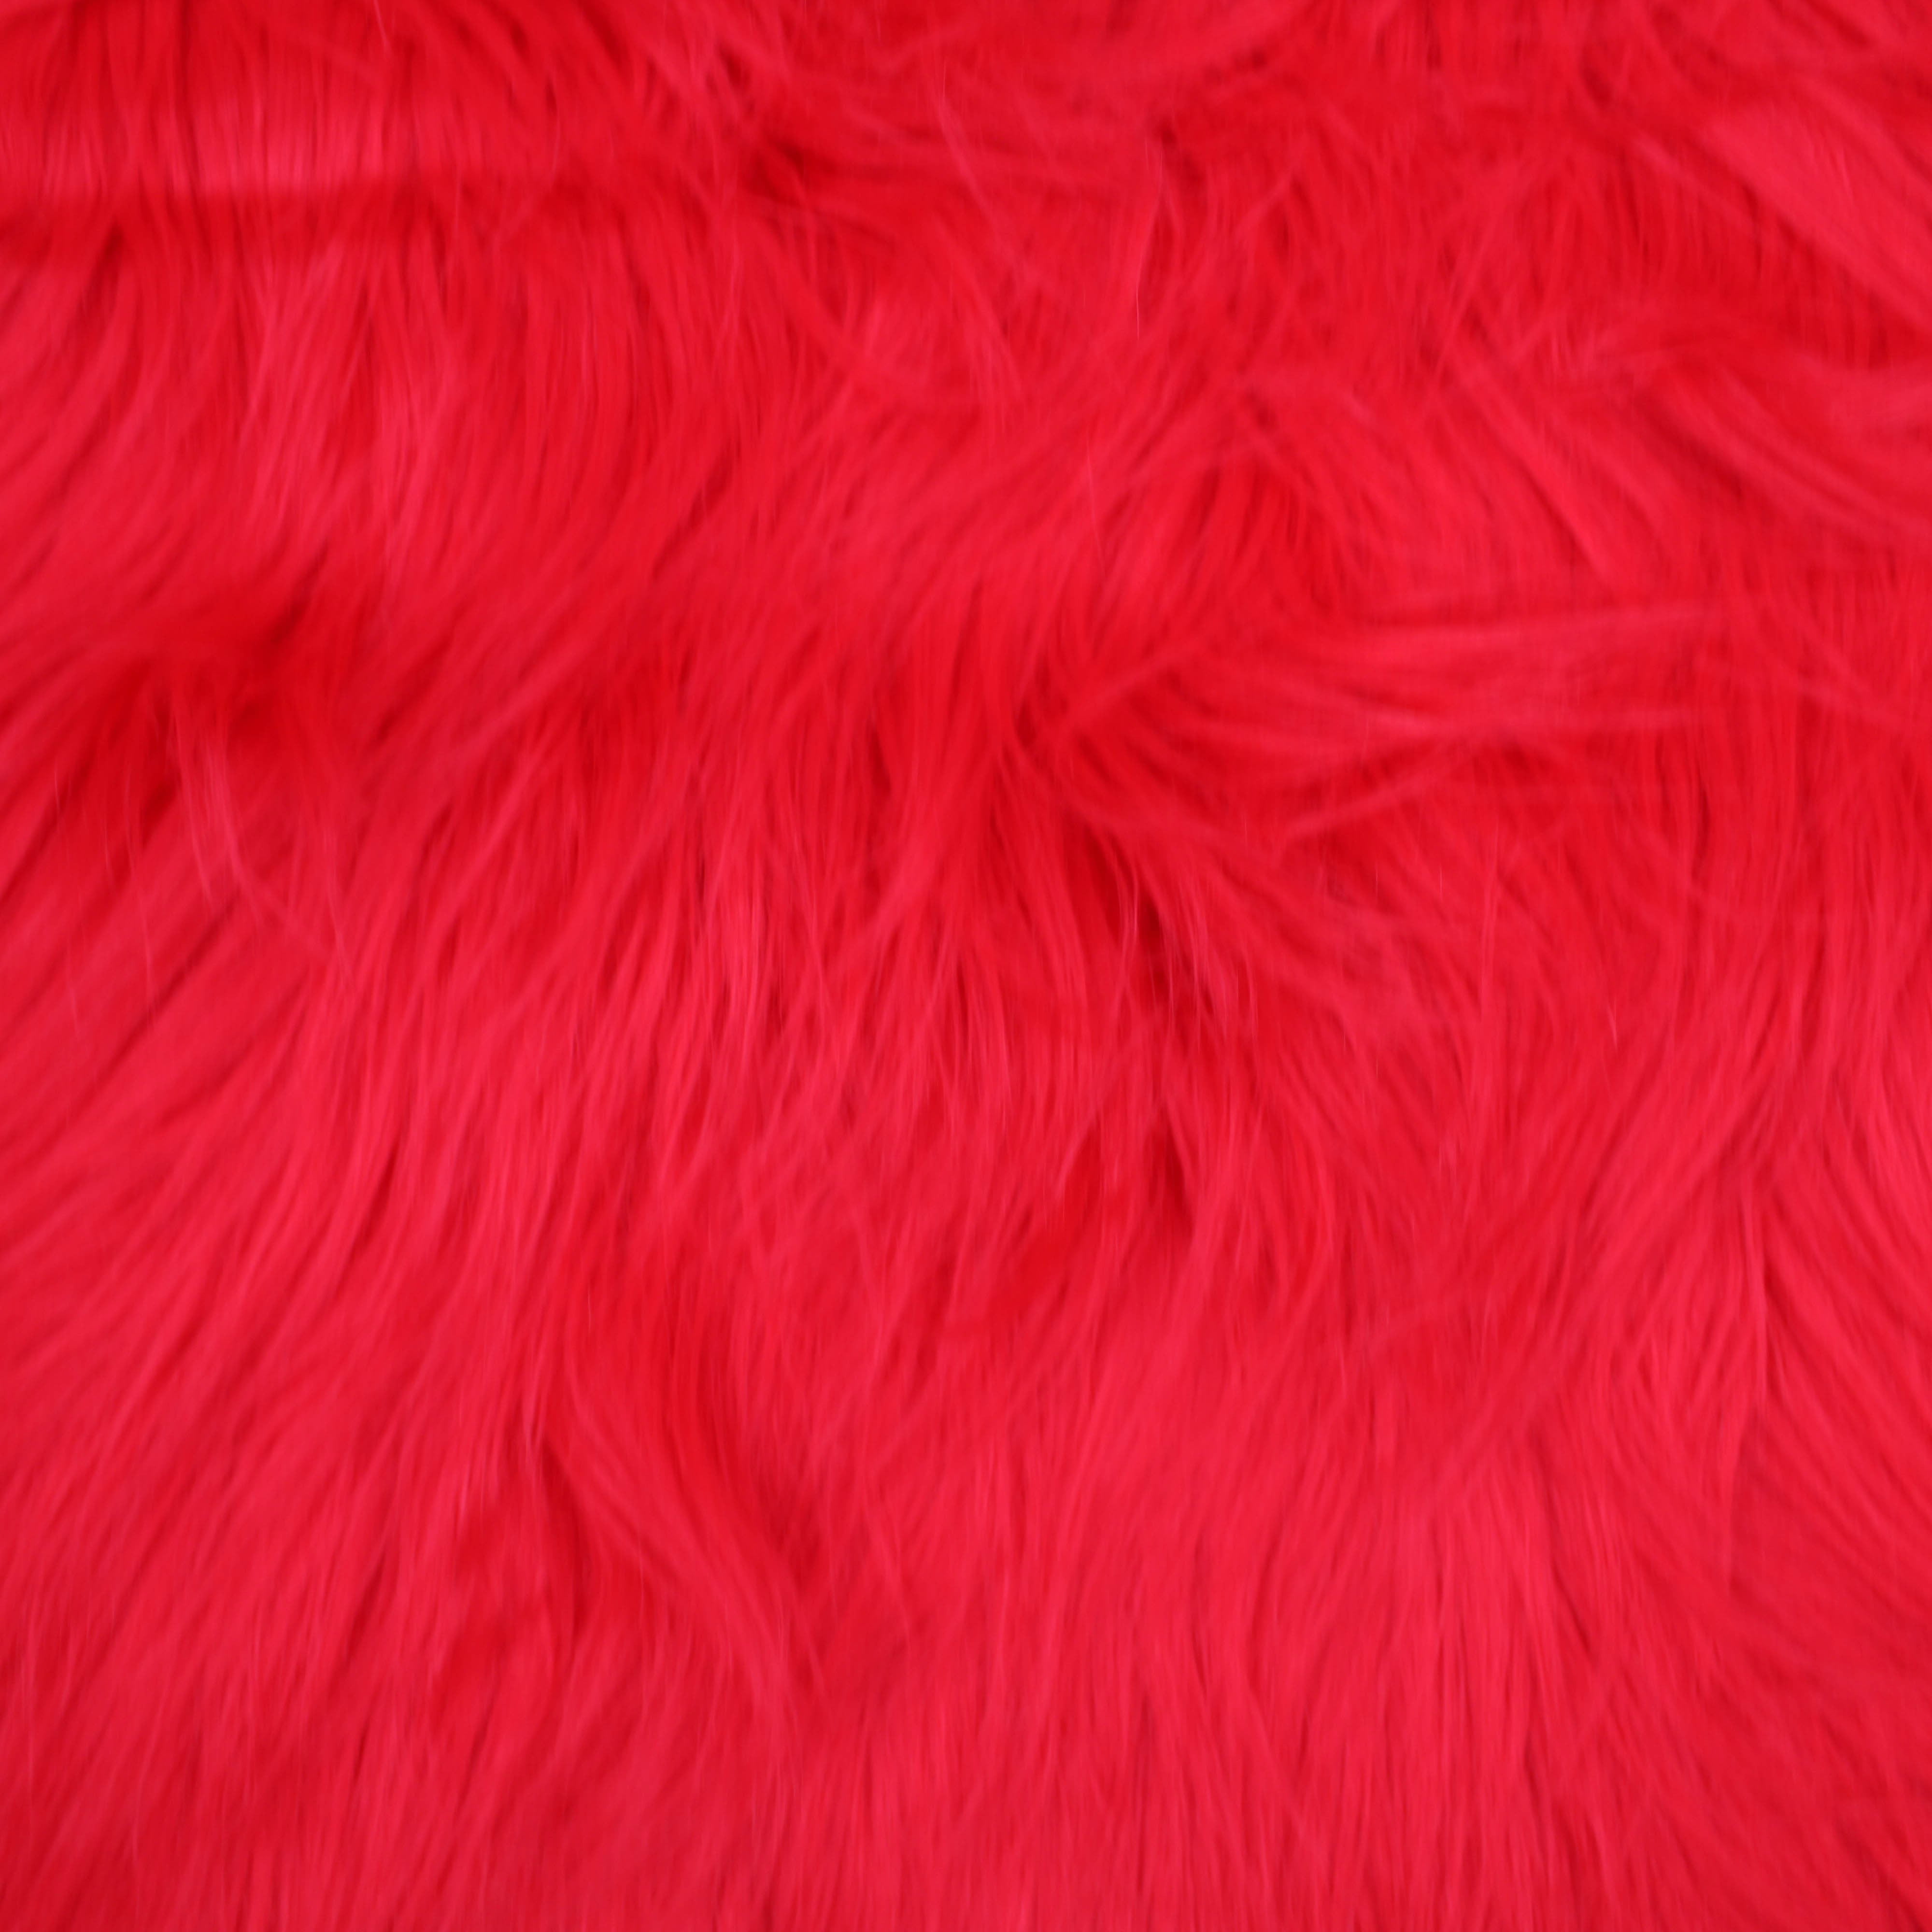  Faux Fur Fabric Long Pile Sparkling Tinsel RED / 58 Wide/Sold  by The Yard : Arts, Crafts & Sewing